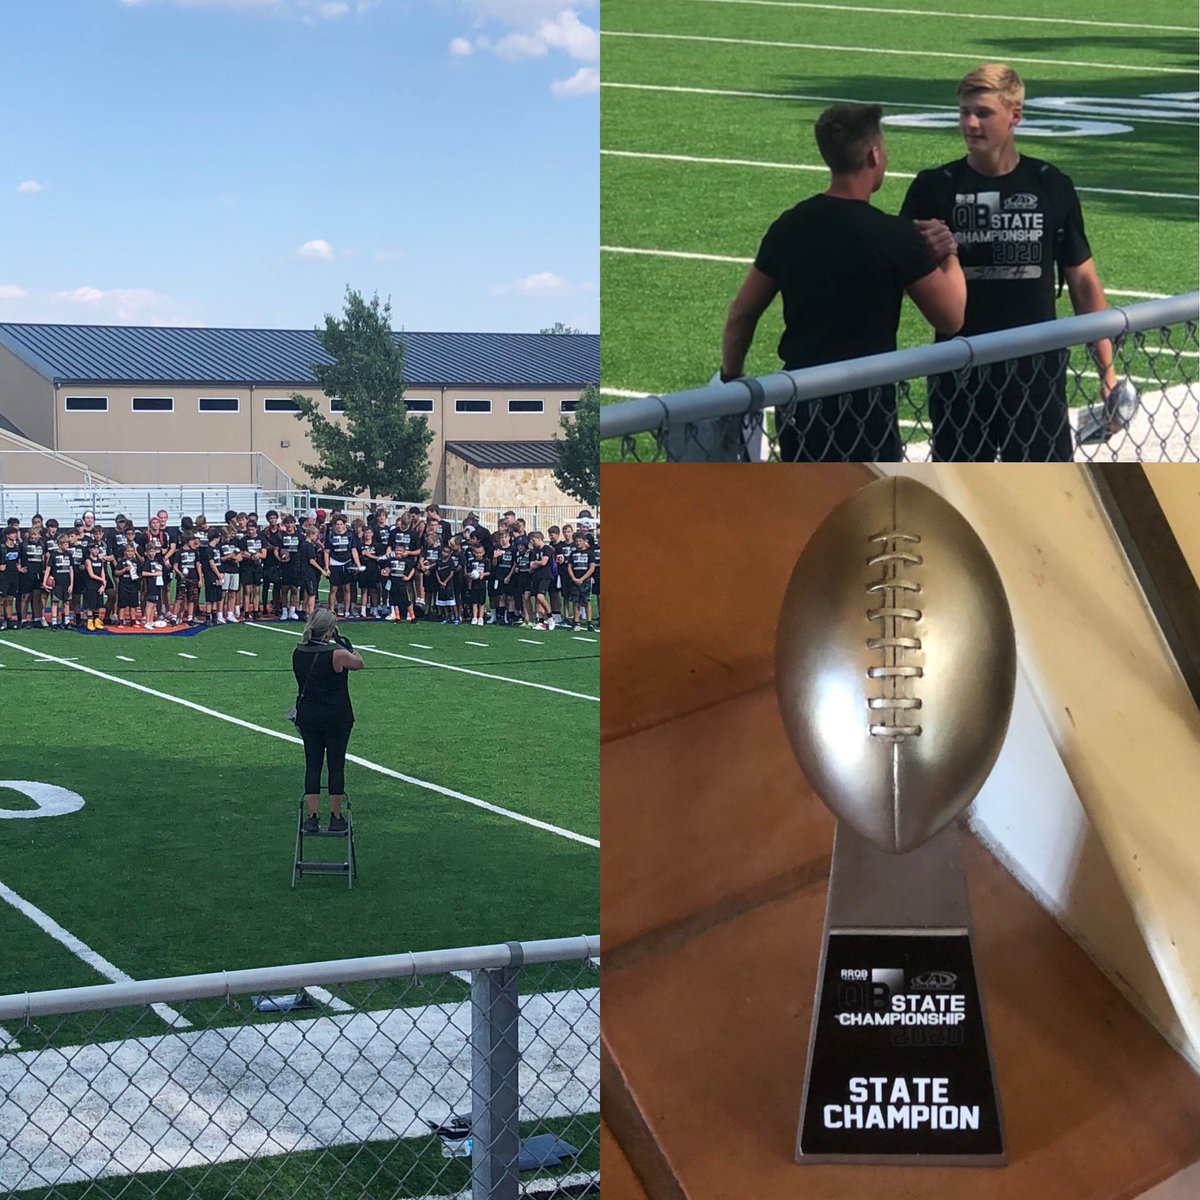 Lots of competitors, several D1 commits, but only one AdvoCare QB Competition Varsity State Champion! @aj_smithshawver  wowed the crowd with his arm talent today! @CHHS_FOOTBALL @CoachKirkMartin @TXHSFB @PantherFBBoost @simplyCoachO @dctf #dualsportathlete 🏈⚾️